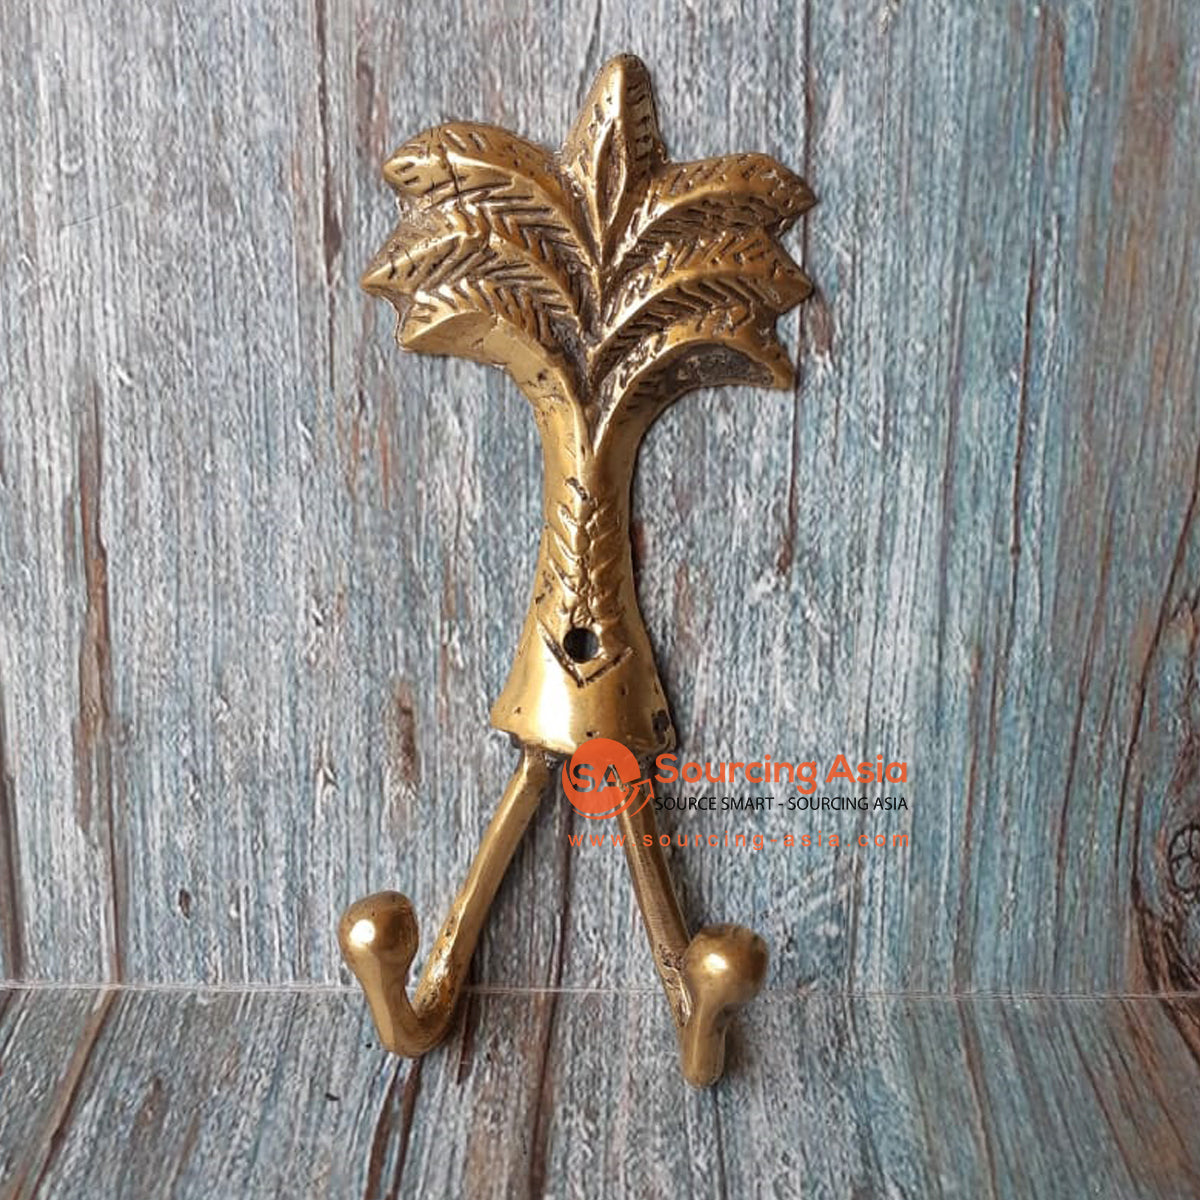 GB184 BRASS TWO HOOKS WITH PALM TREE DECORATION